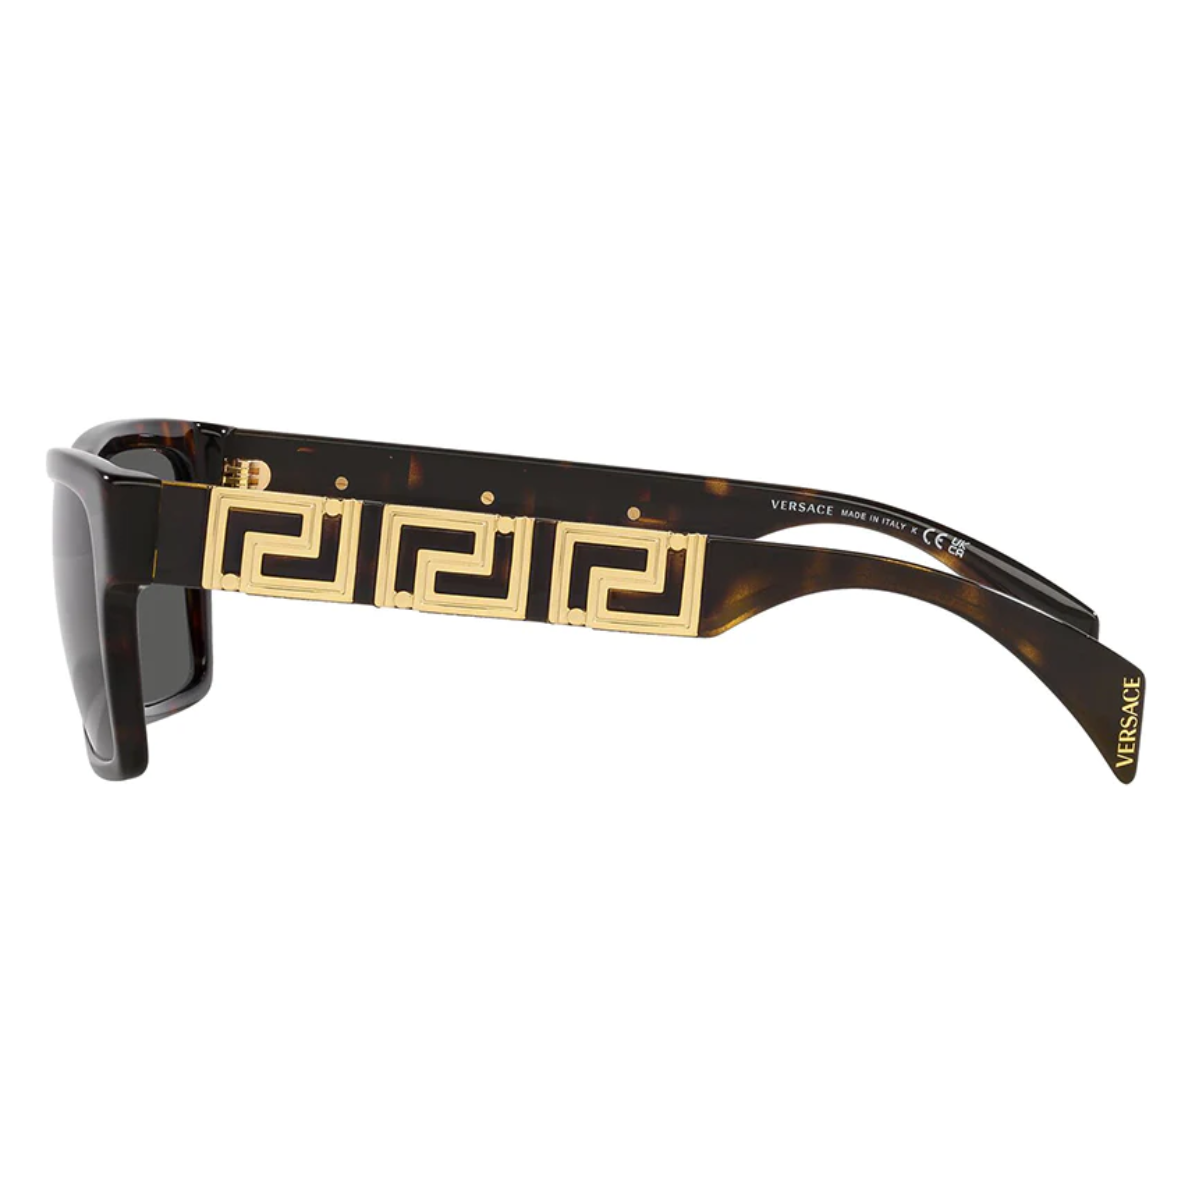 "Discover the Versace 4445 108/87 54 Sunglass at Optorium - the ultimate destination for men's designer shades. Shop now and elevate your style with luxury sunglasses."